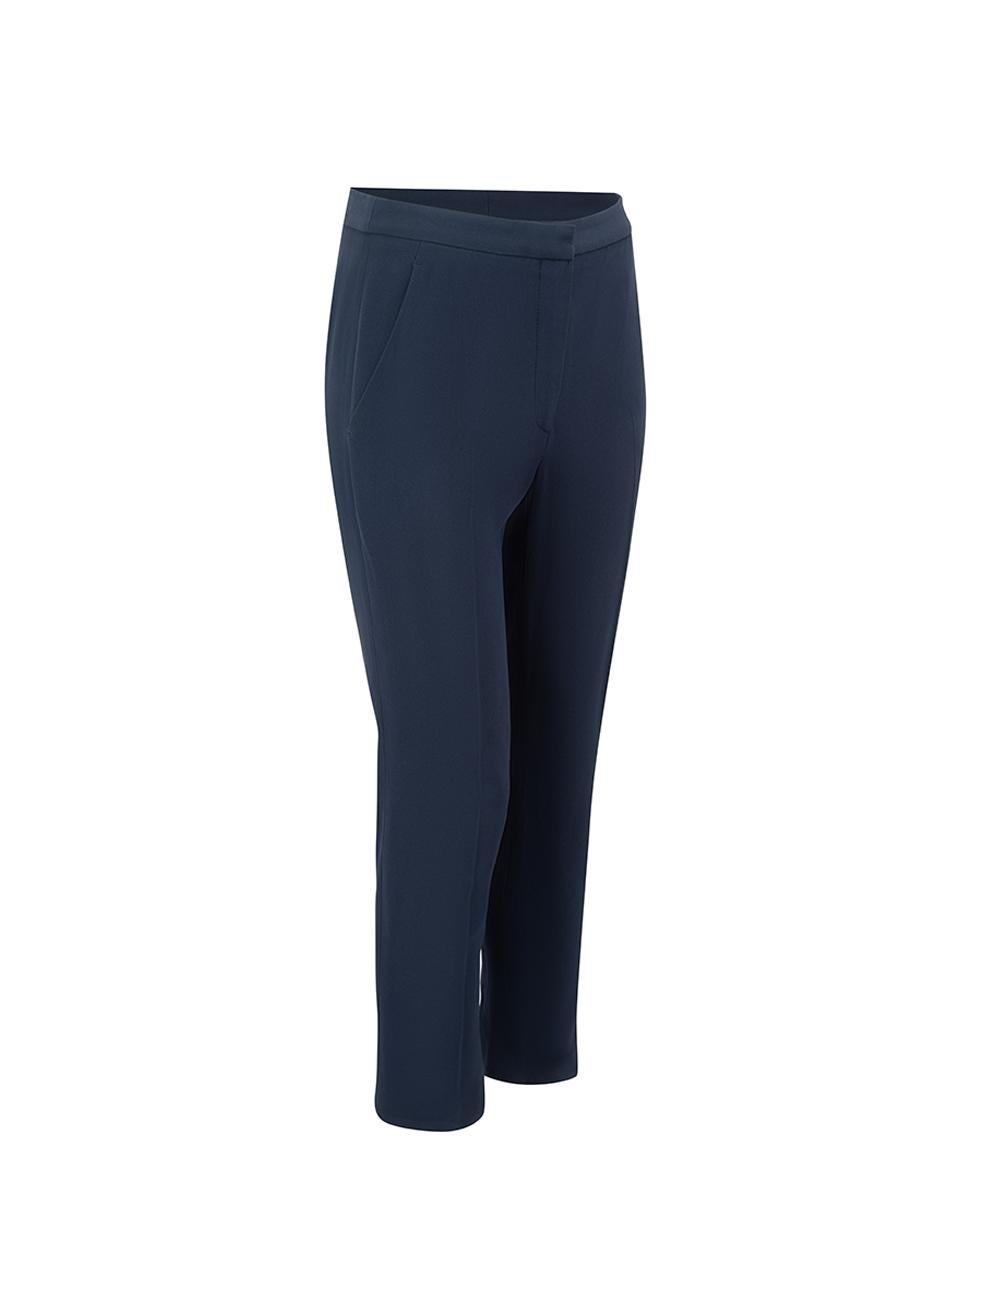 CONDITION is Very good. Minimal wear to trousers is evident. Minimal wear to rear-left and rear lining with light marks on this used Alexander McQueen designer resale item.



Details


Navy 

Synthetics

Slim leg trousers

High waisted

Fly zip